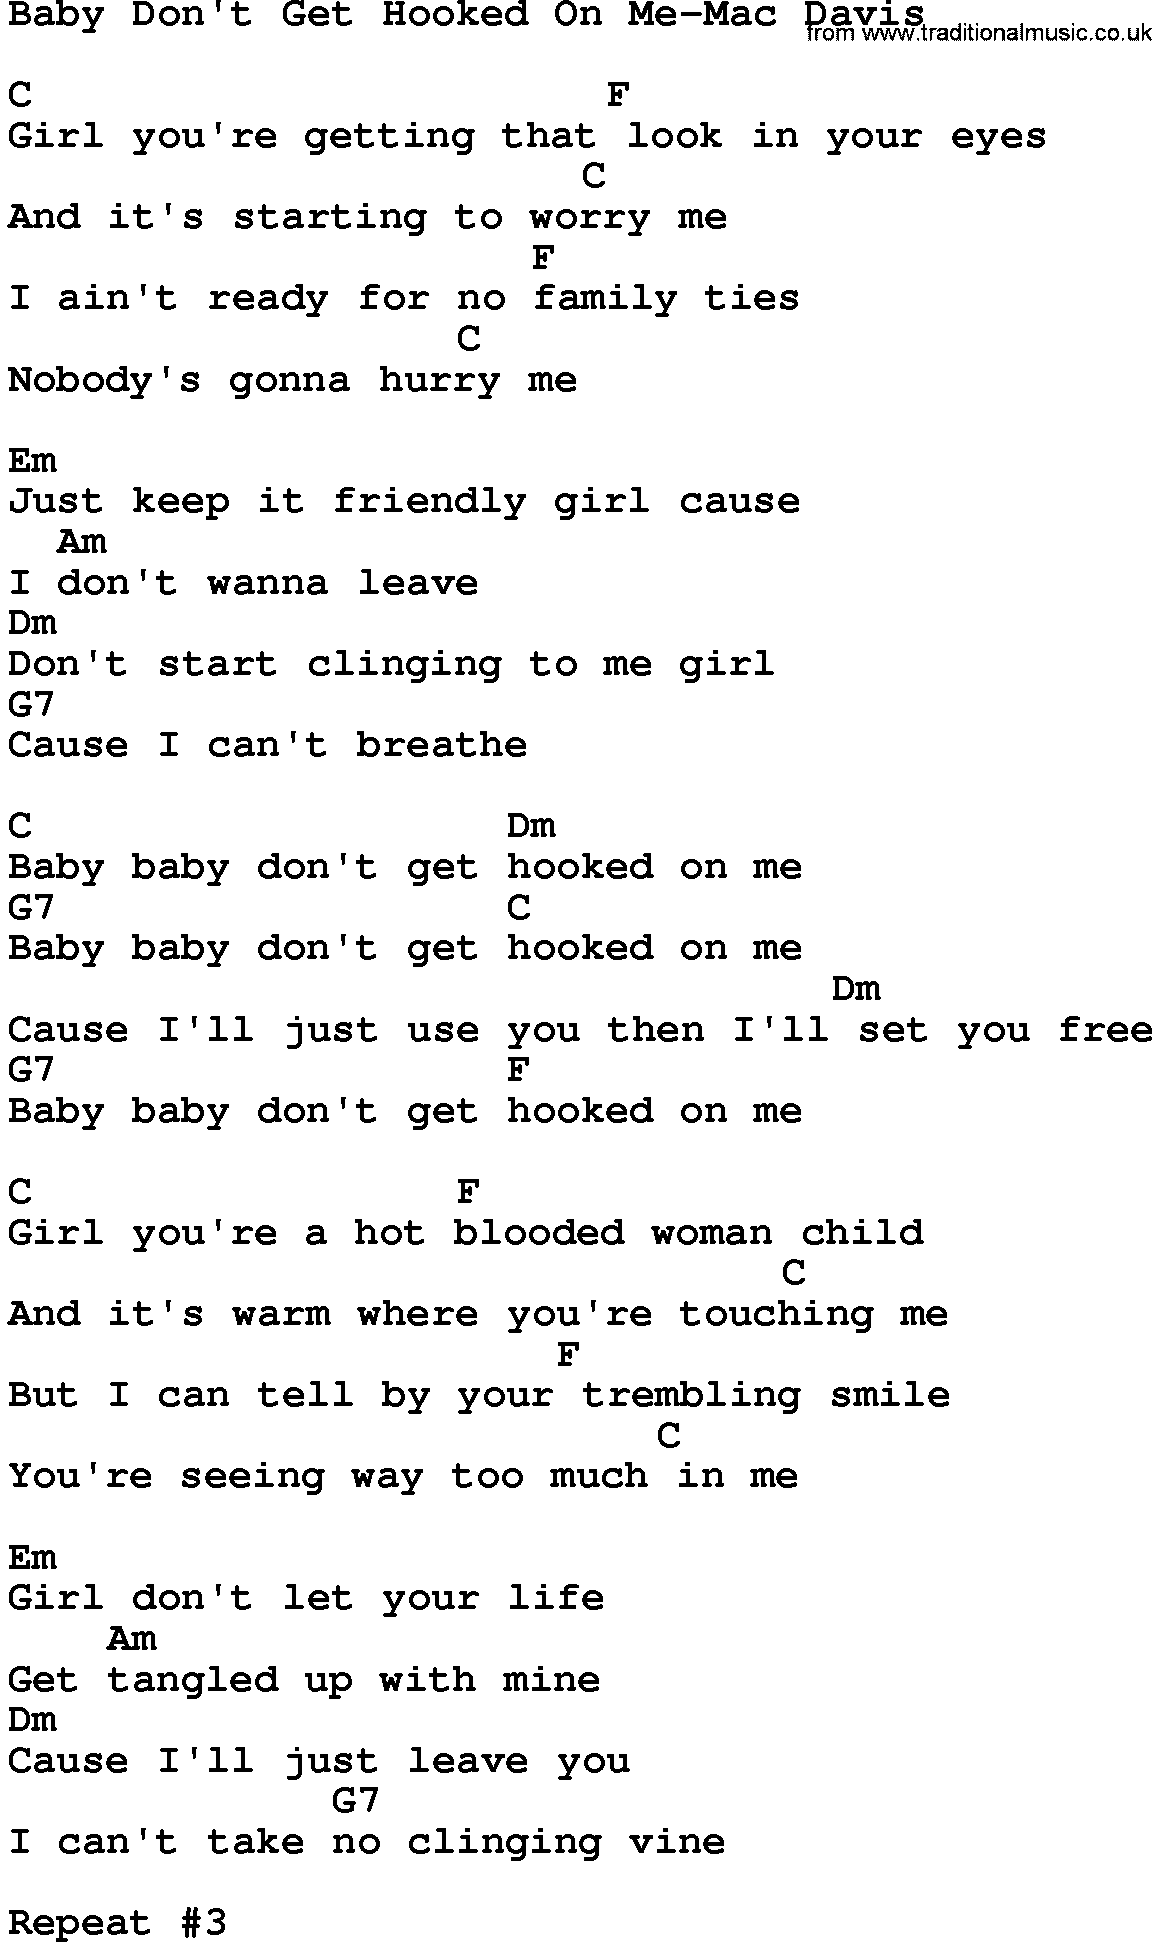 Country music song: Baby Don't Get Hooked On Me-Mac Davis lyrics and chords